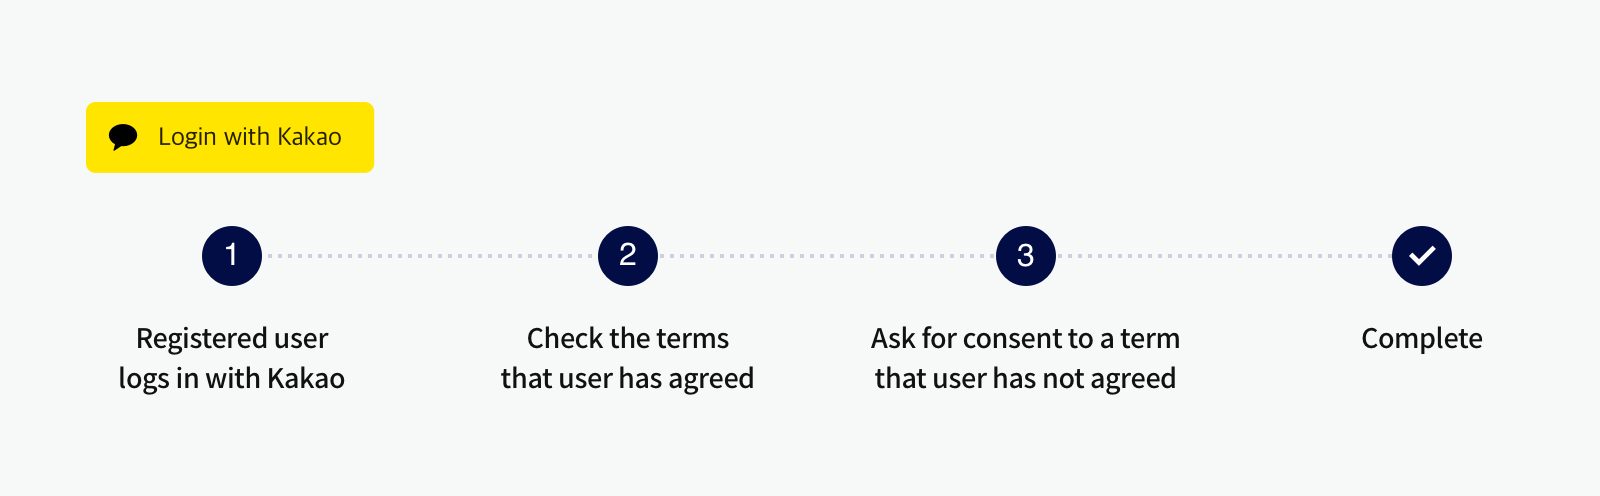 Process of obtaining consent to the service terms that have not been agreed